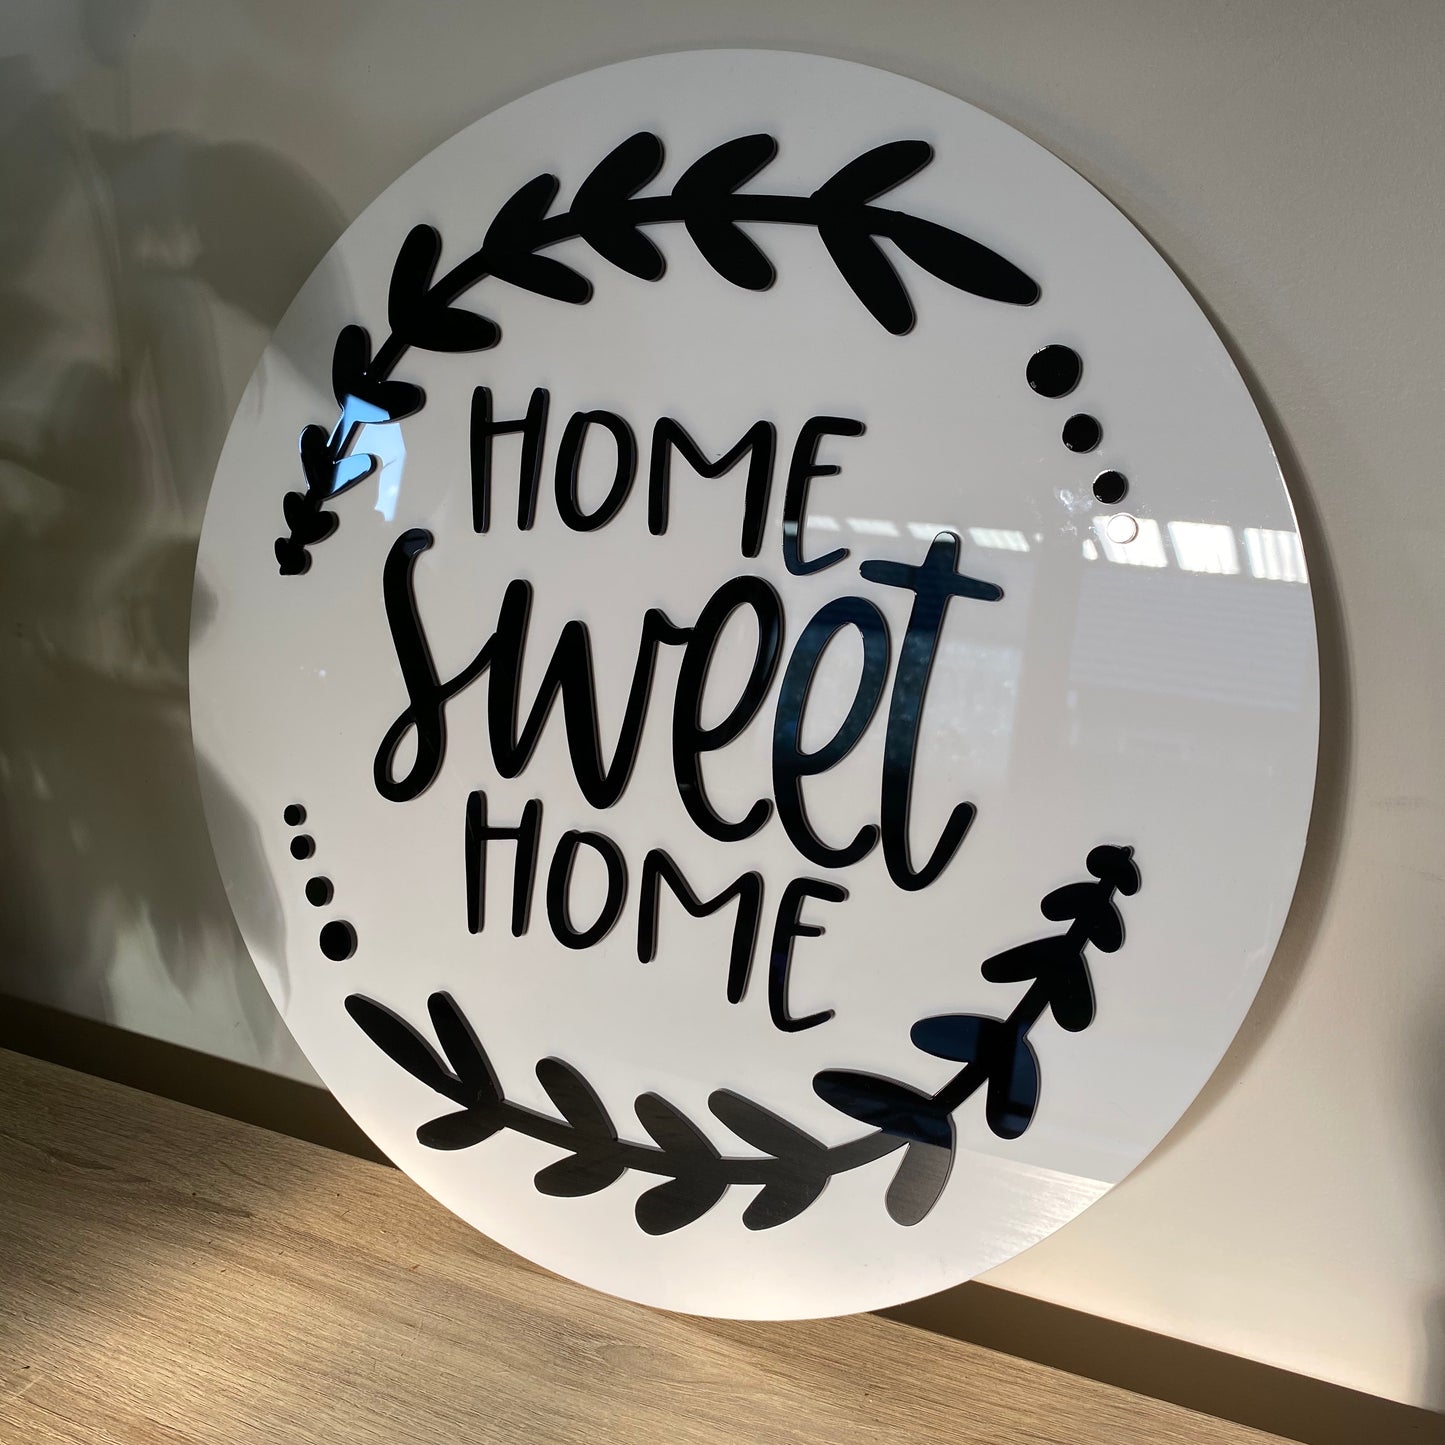 Home Sweet Home - Younique Collective